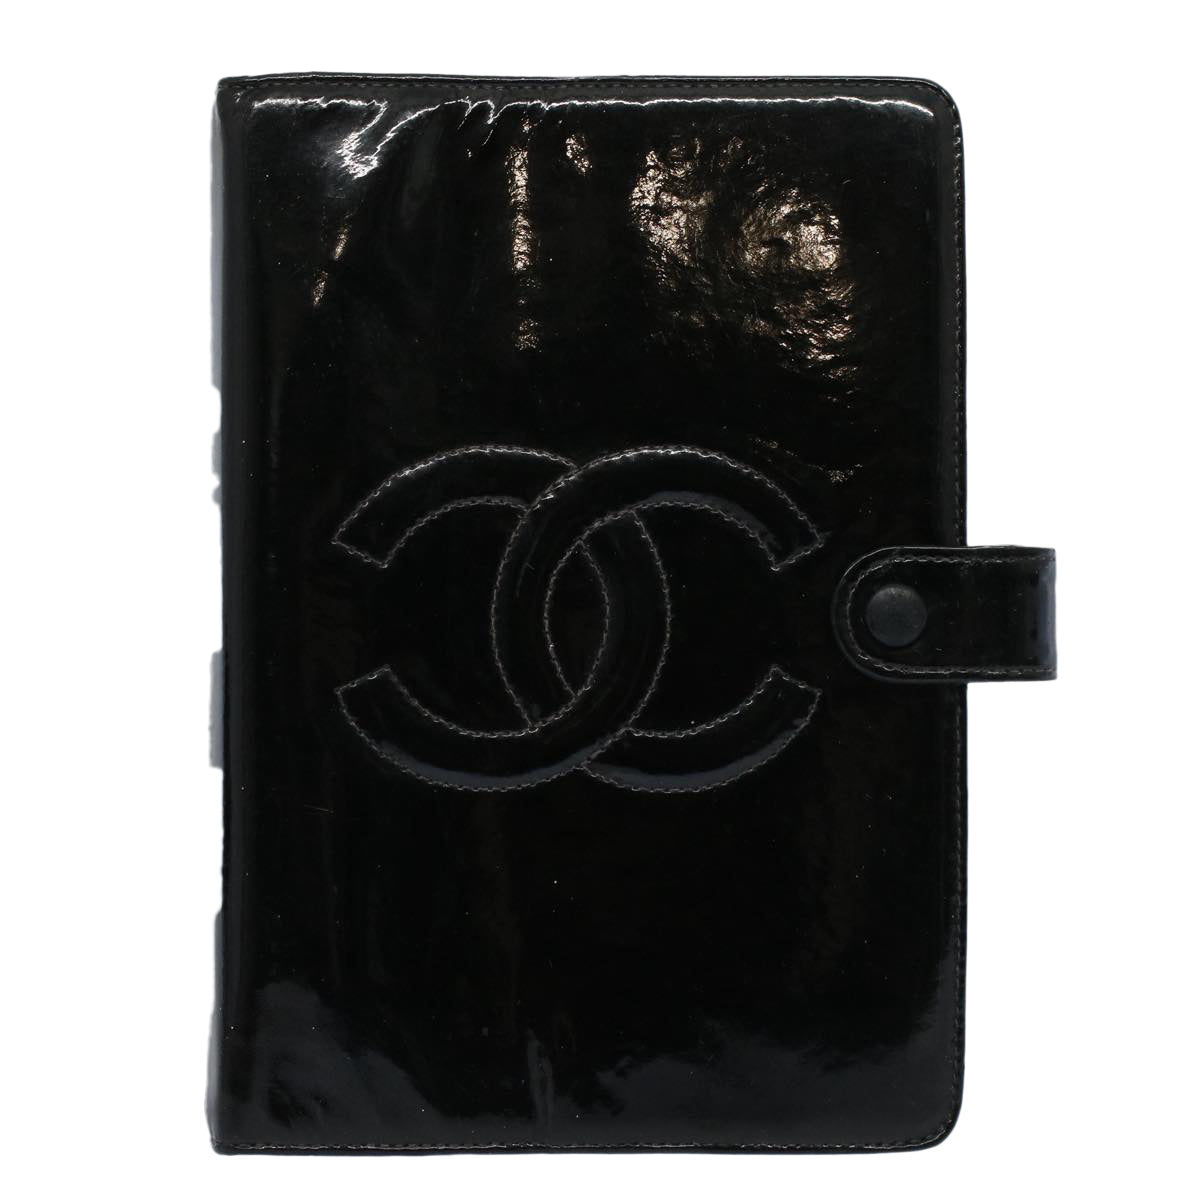 CHANEL Agenda Day Planner Cover Patent leather Black CC Auth bs9755